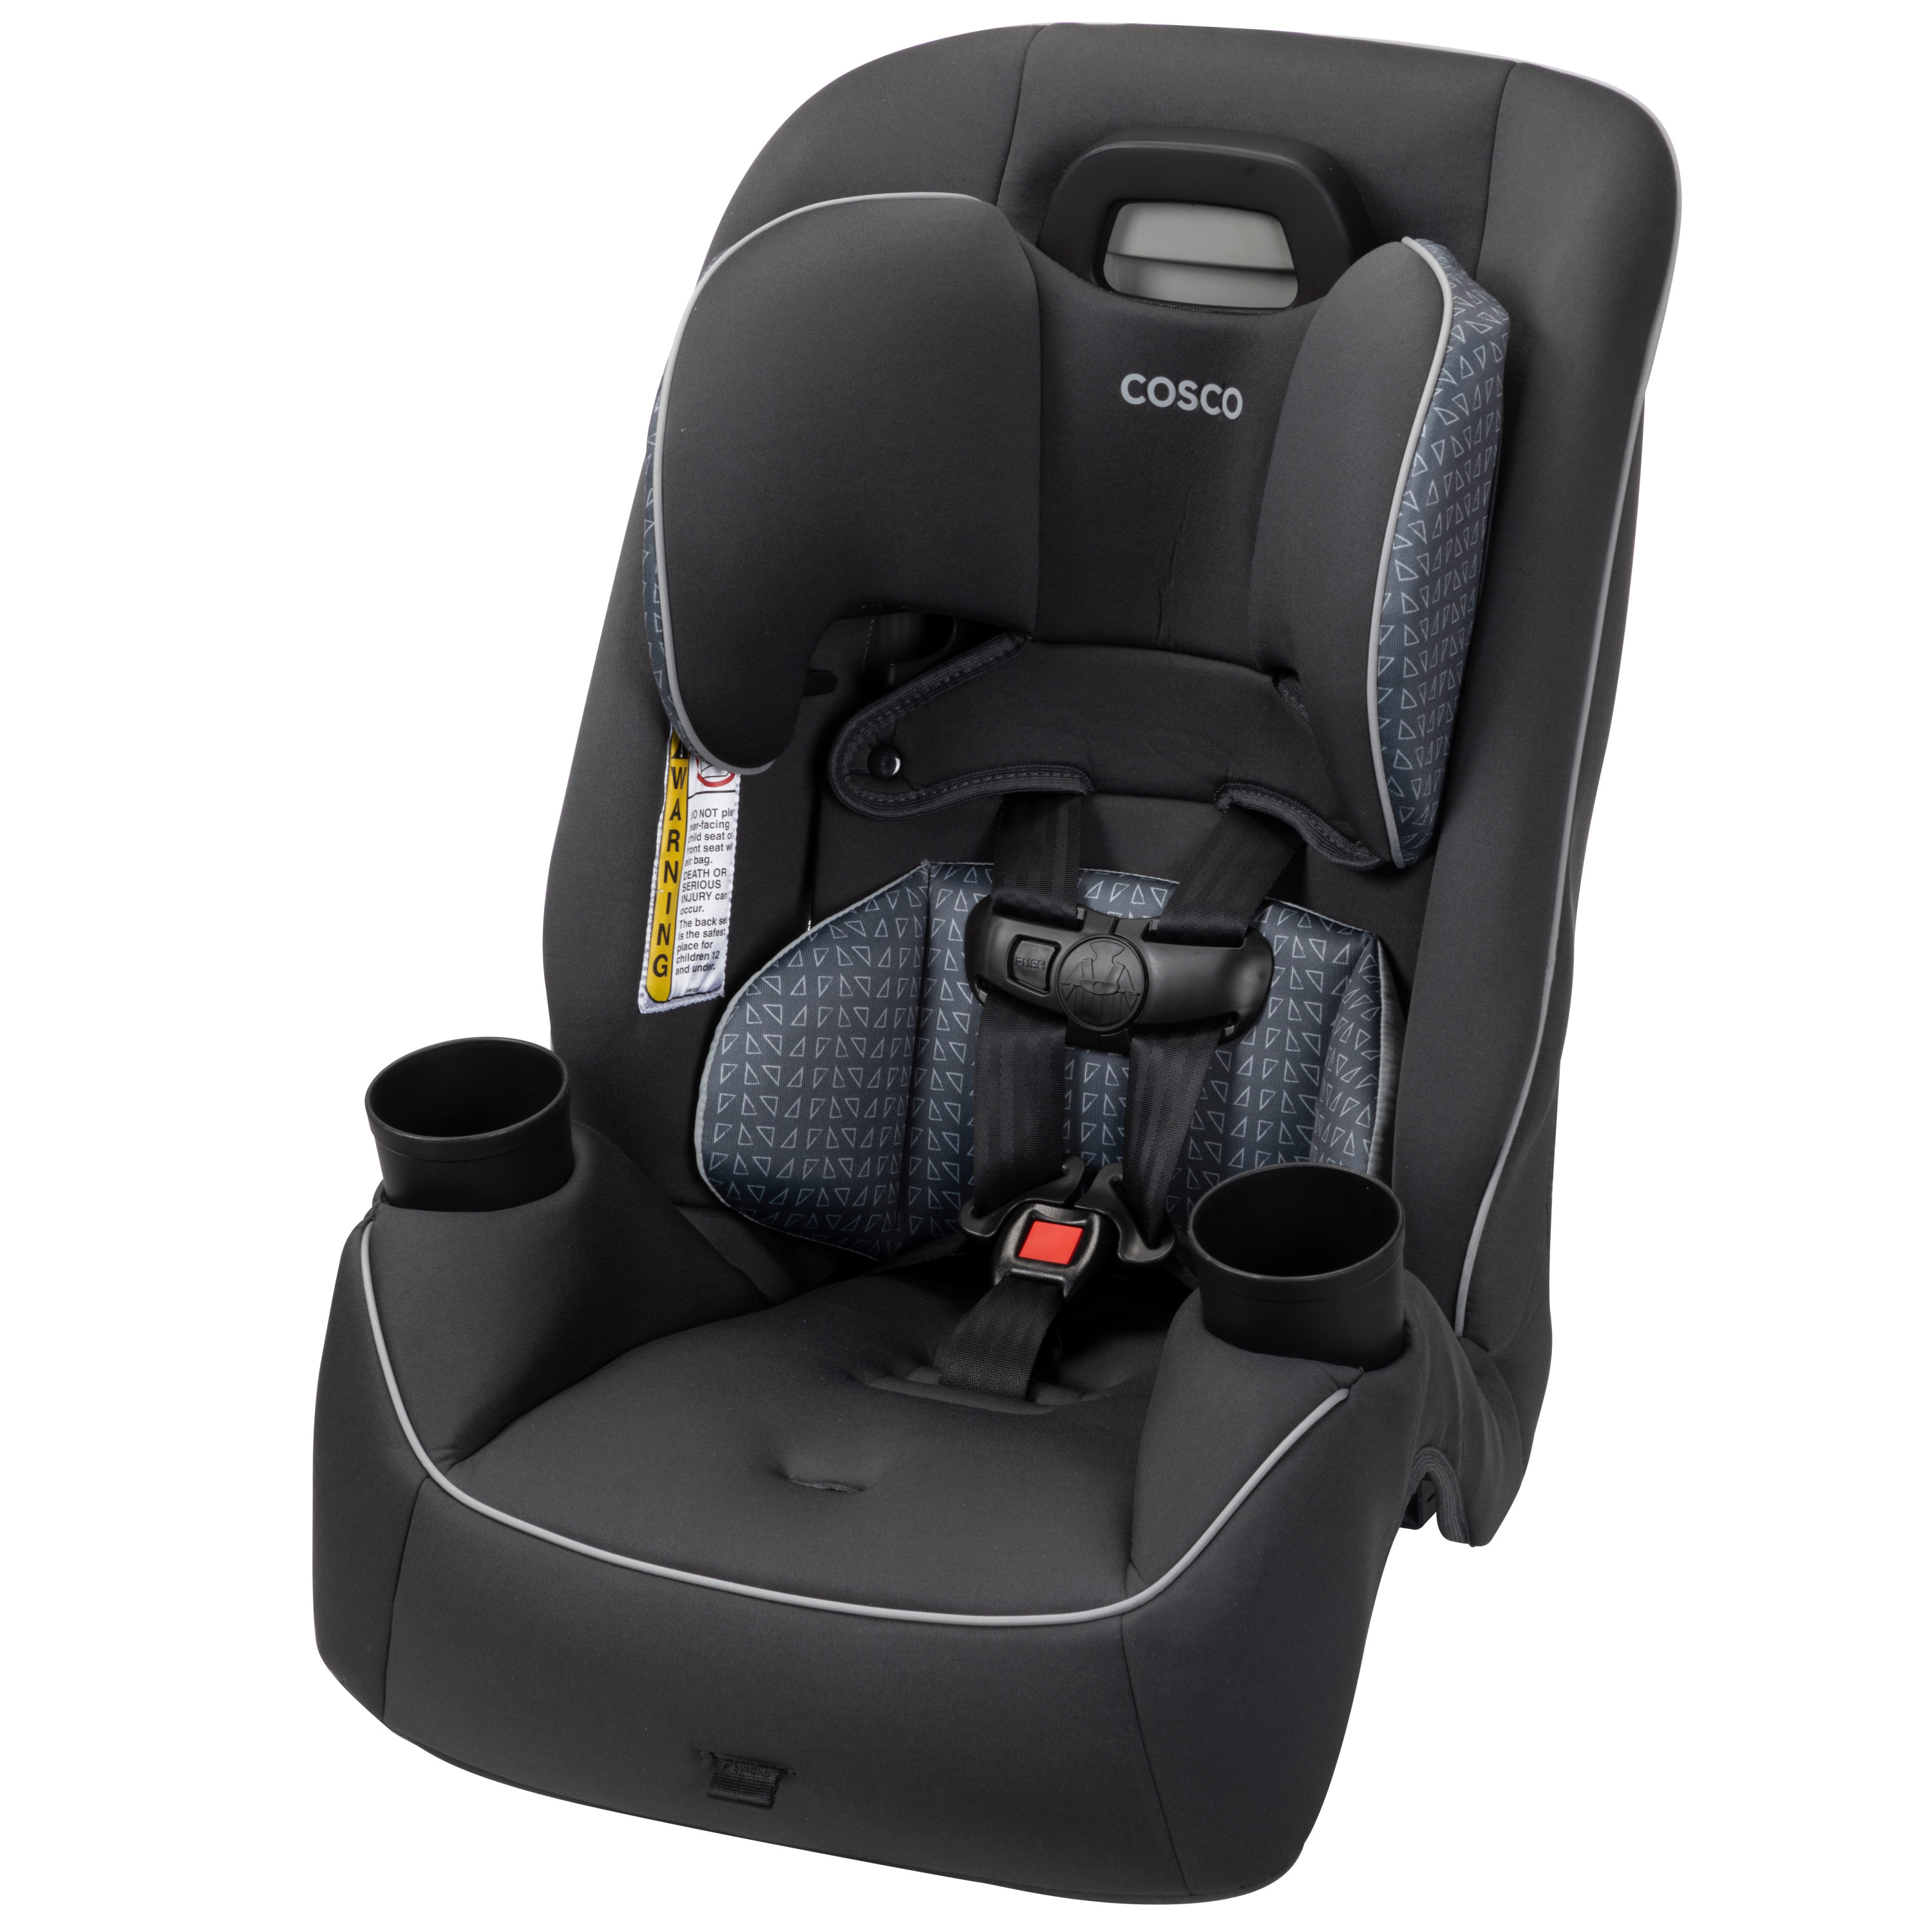 Cosco Kids Easy Elite Slim All-in-One Convertible Car Seat, Grey Glyphs - image 1 of 28